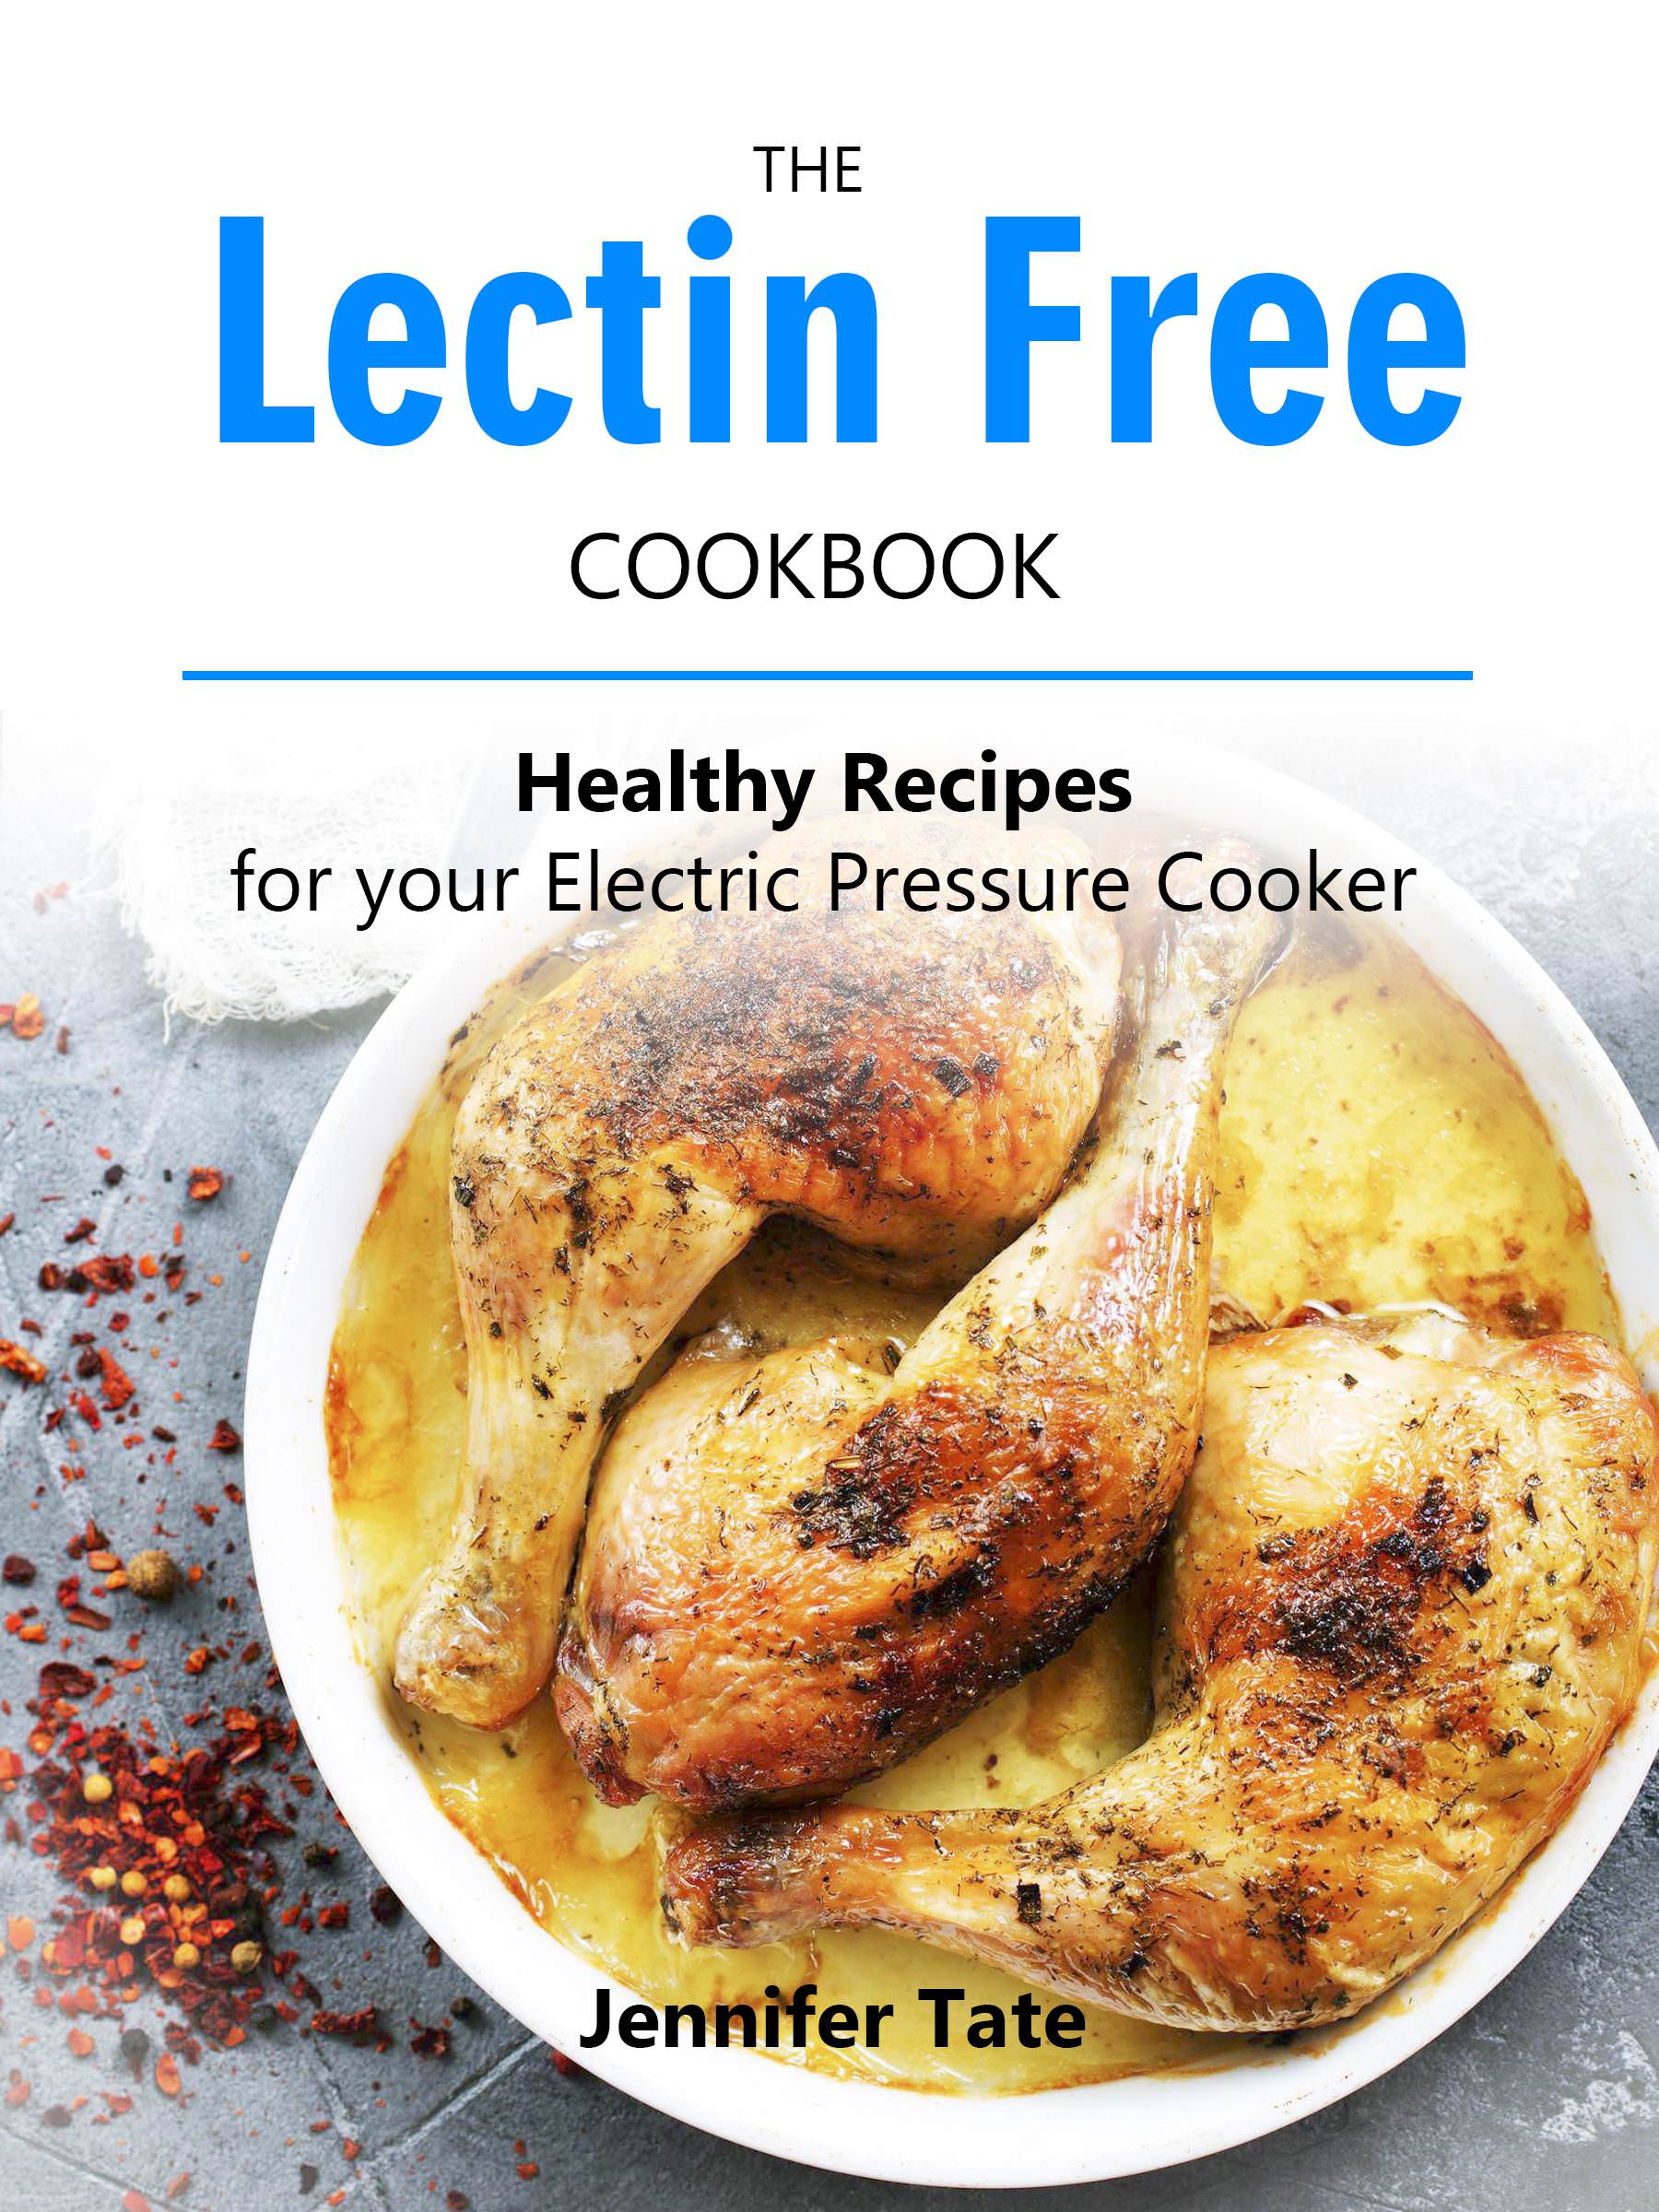 FREE: The Lectin Free Cookbook: Healthy Recipes for Your Electric Pressure Cooker by Jennifer Tate